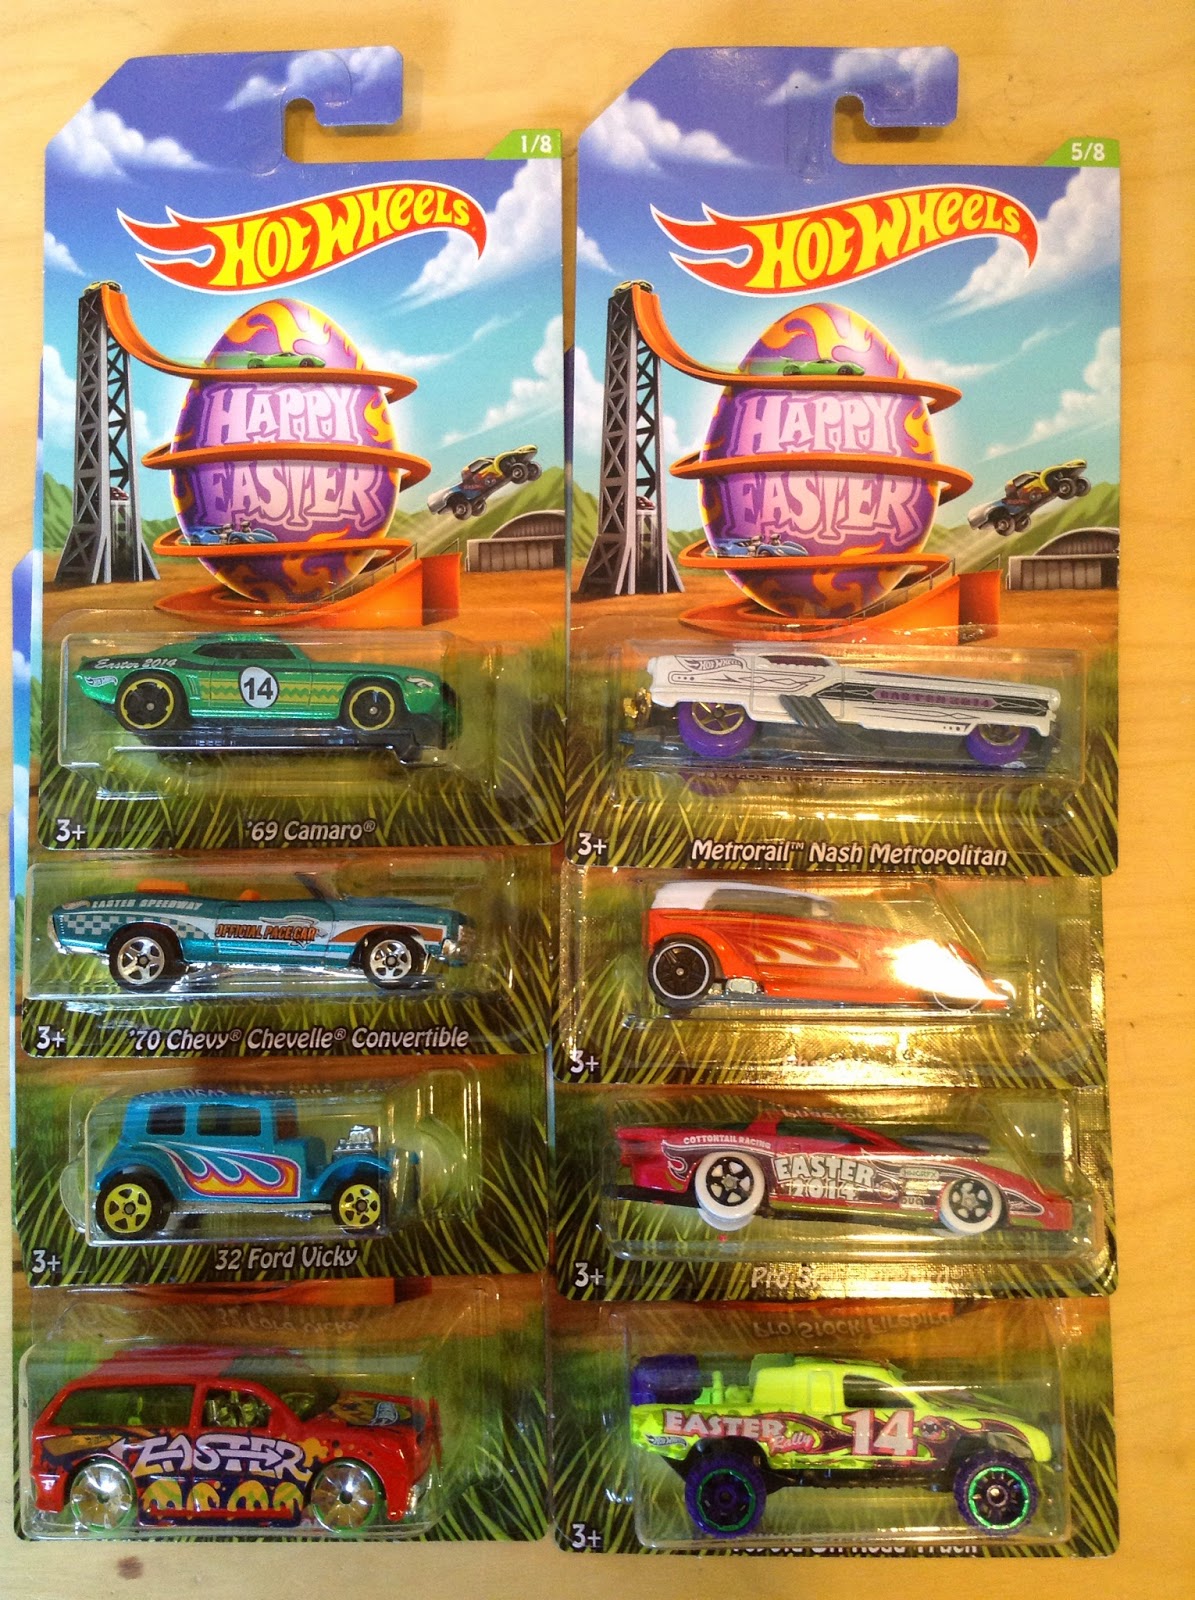 Hot wheels happy easter 2014 32 ford vicky.